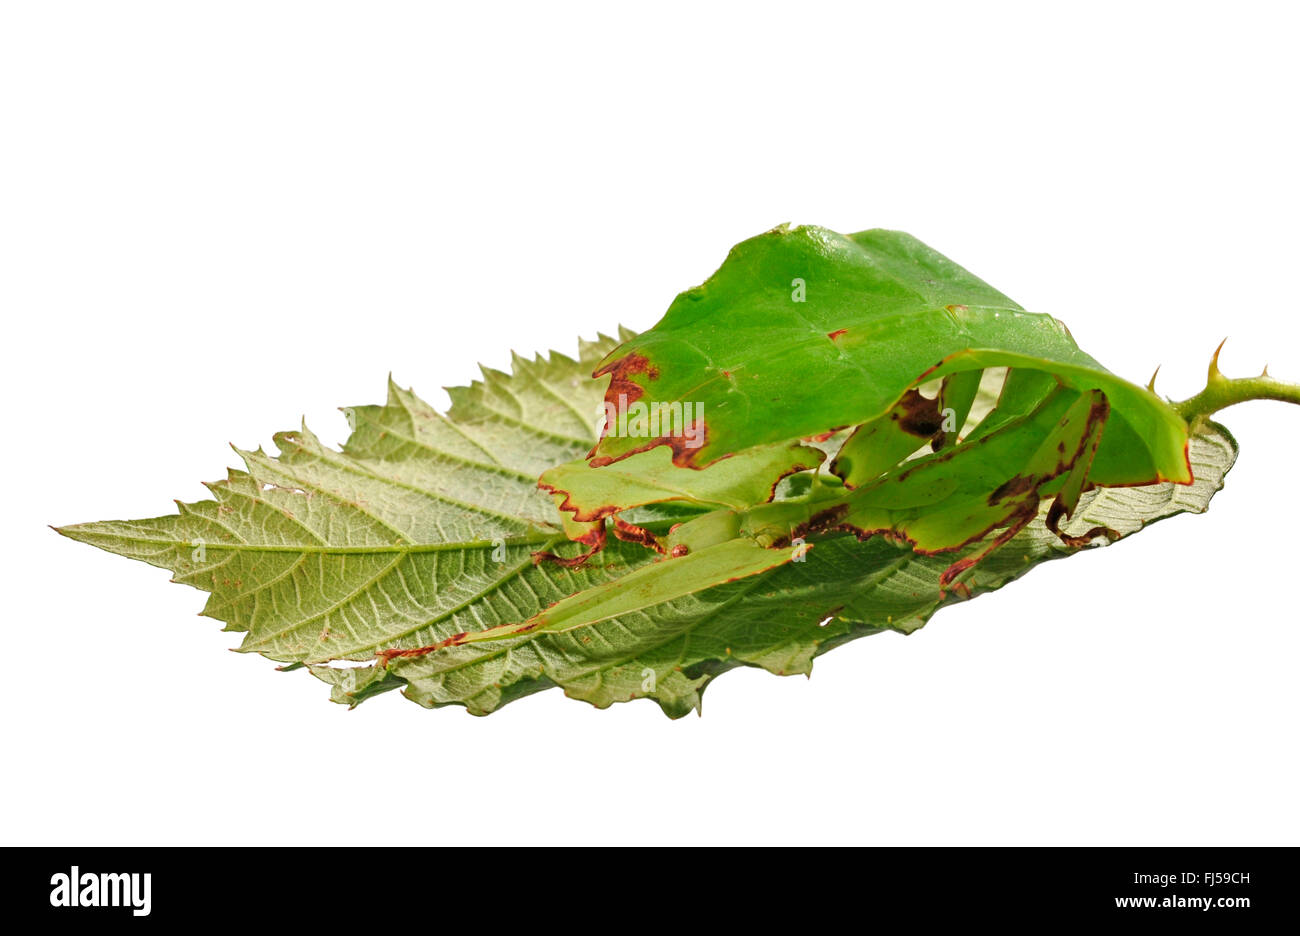 Celebes Leaf Insect, leaf insect, walking leave (Phyllium celebicum), female on blackberry leaf, cut out Stock Photo